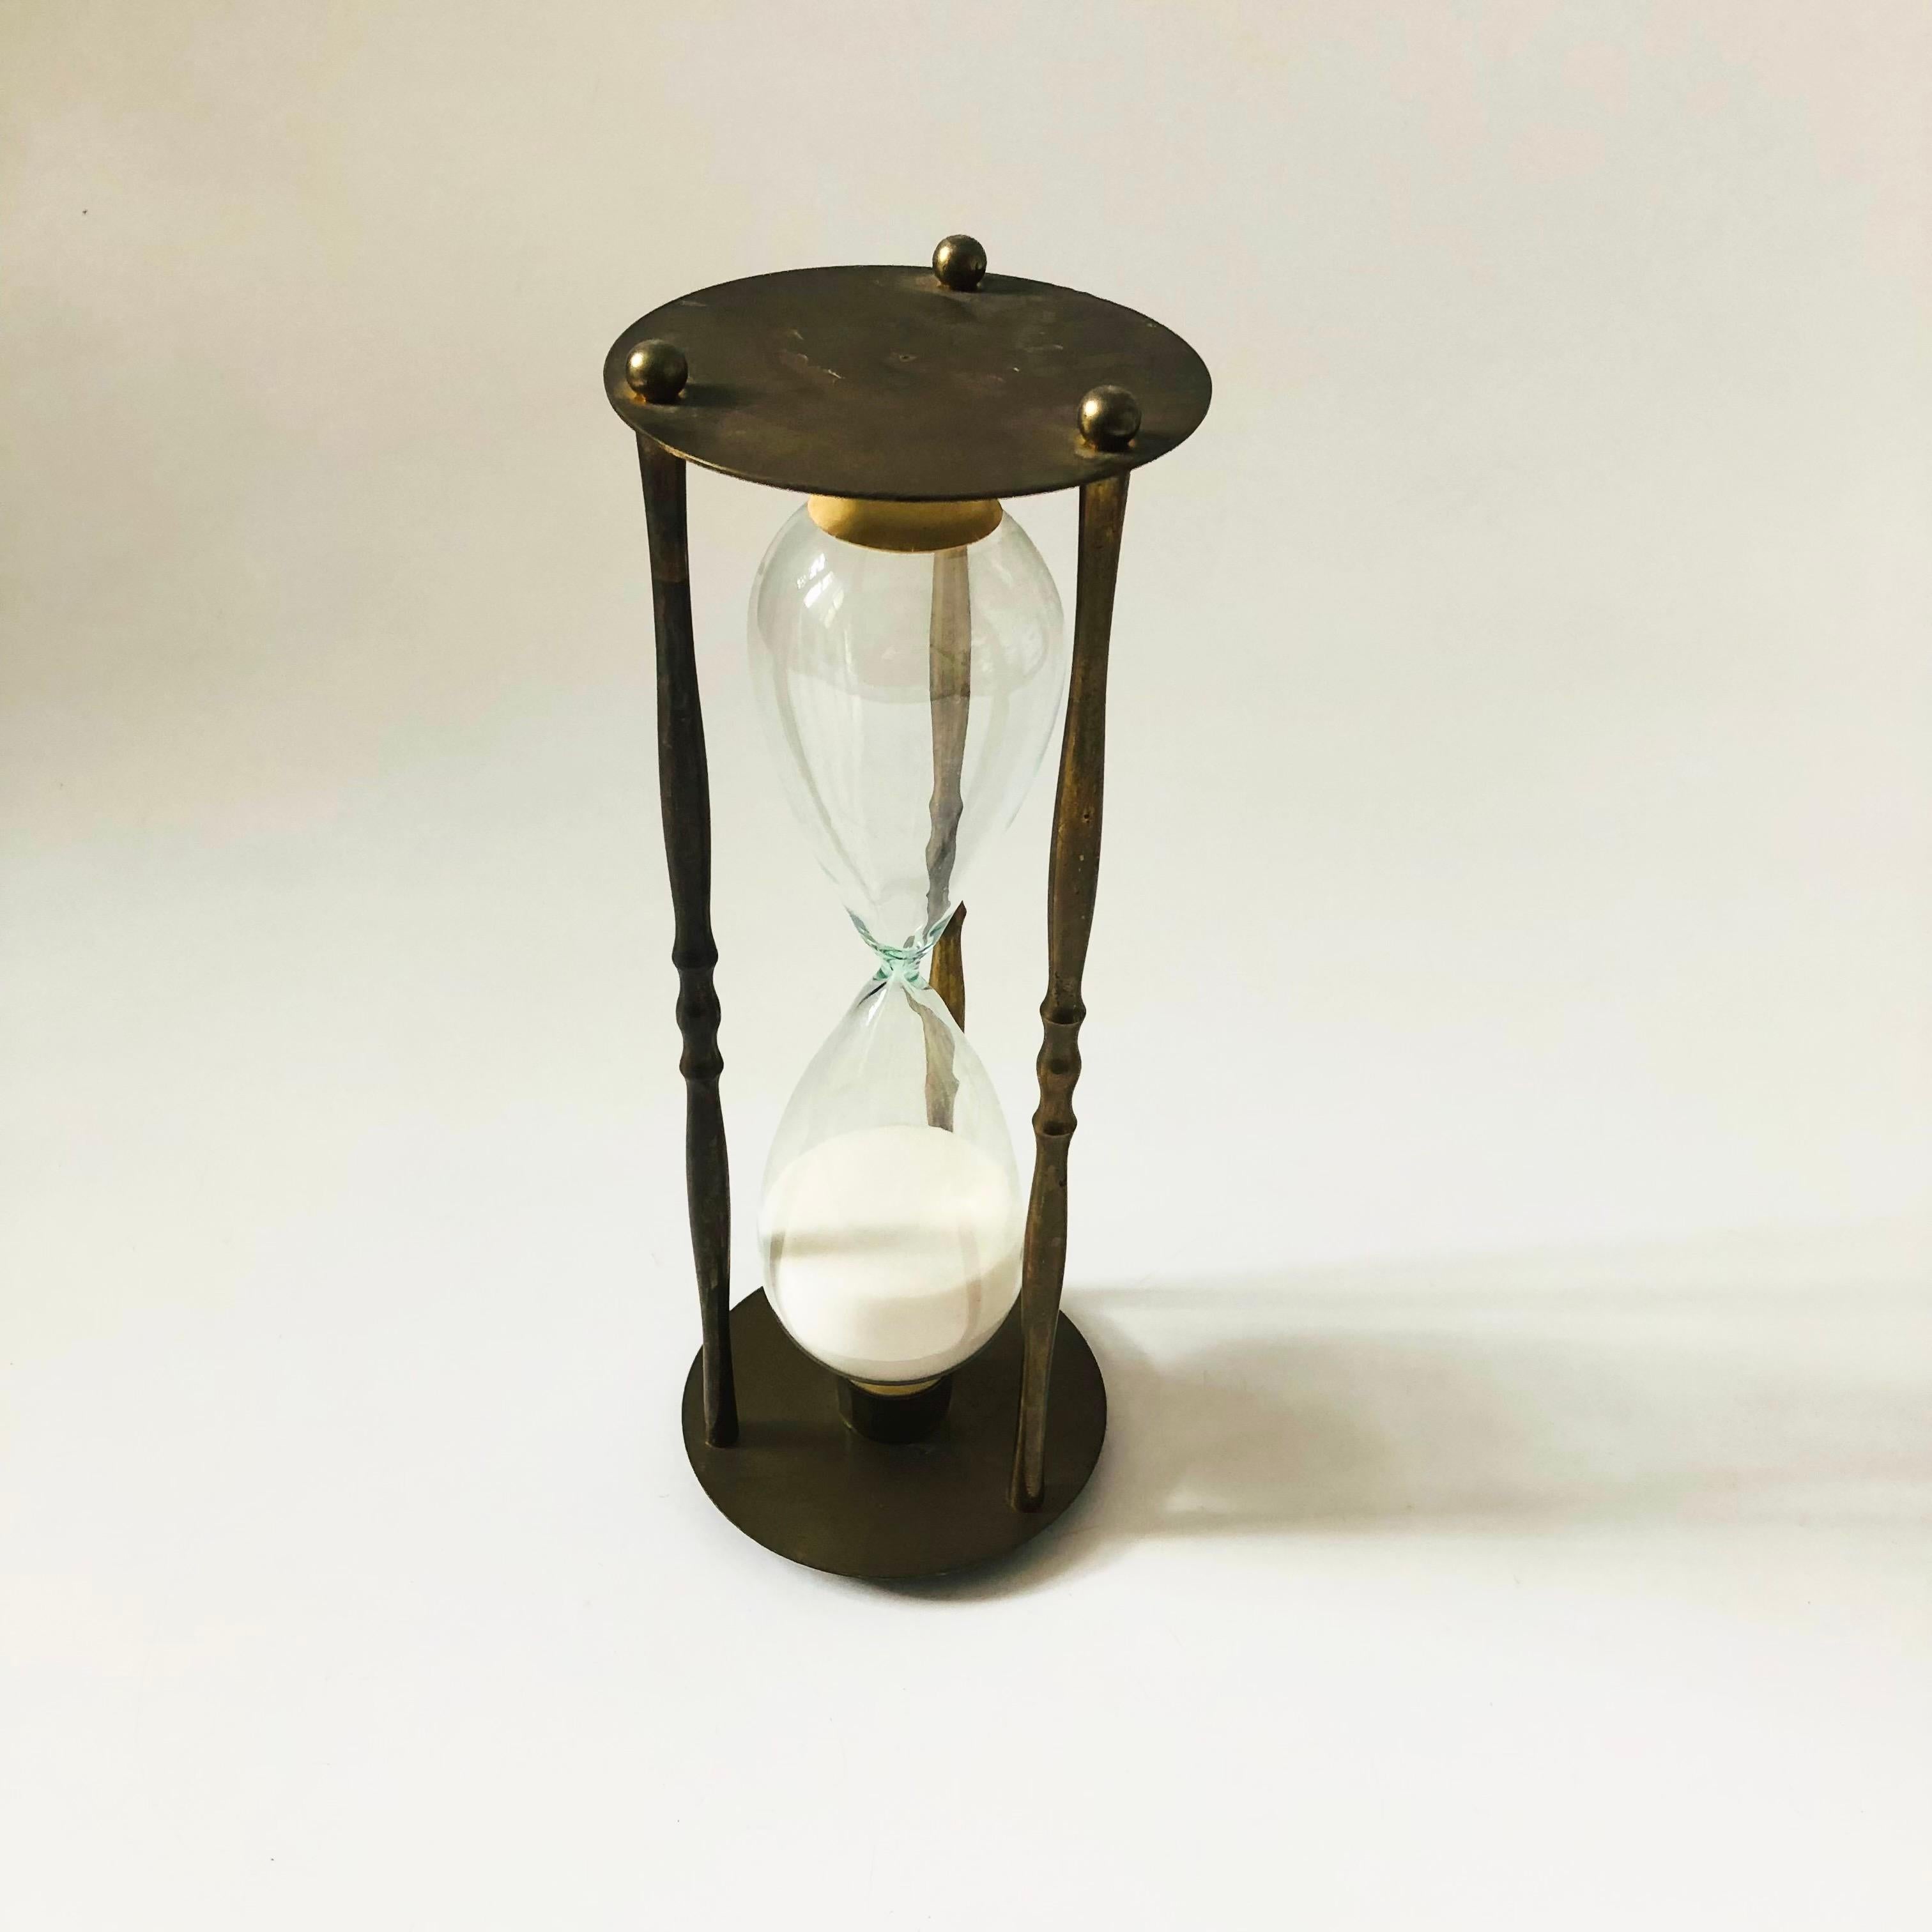 A large vintage brass and glass hourglass. Filled with white sand. Rubber fittings hold the glass in place.

